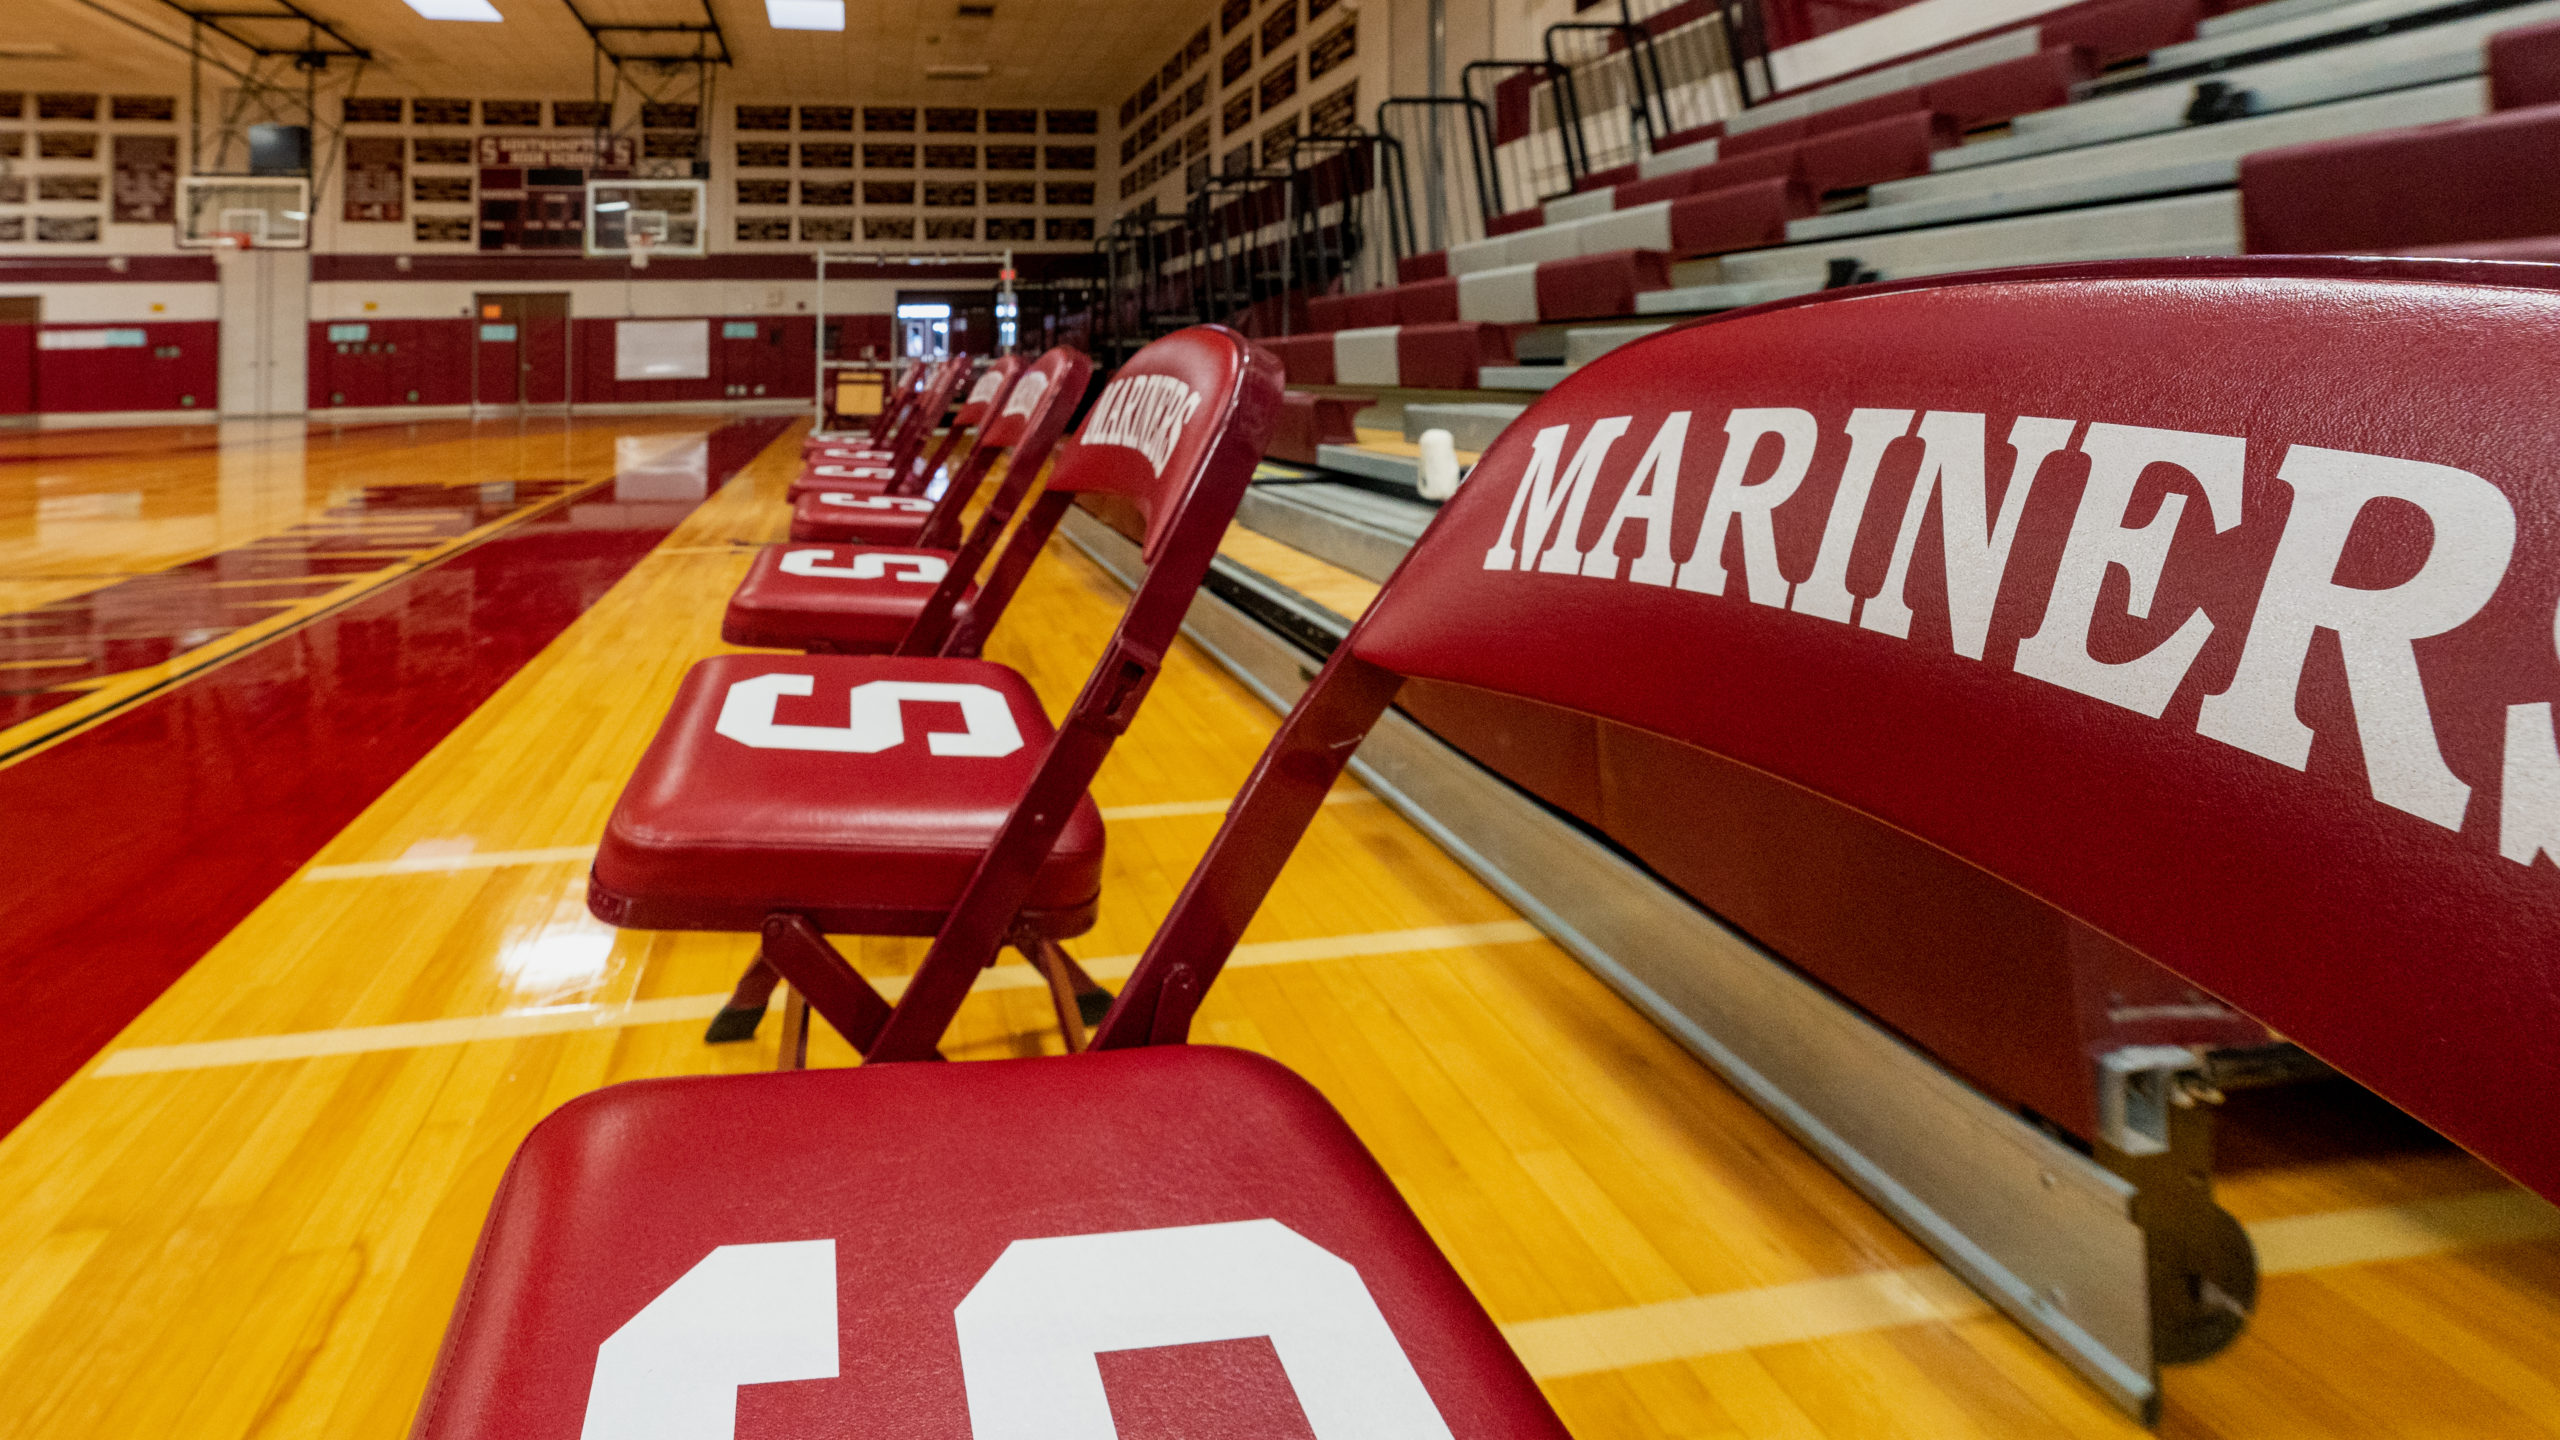 Six members of the Southampton varsity boys basketball team are currently in a 10-day quarantine.